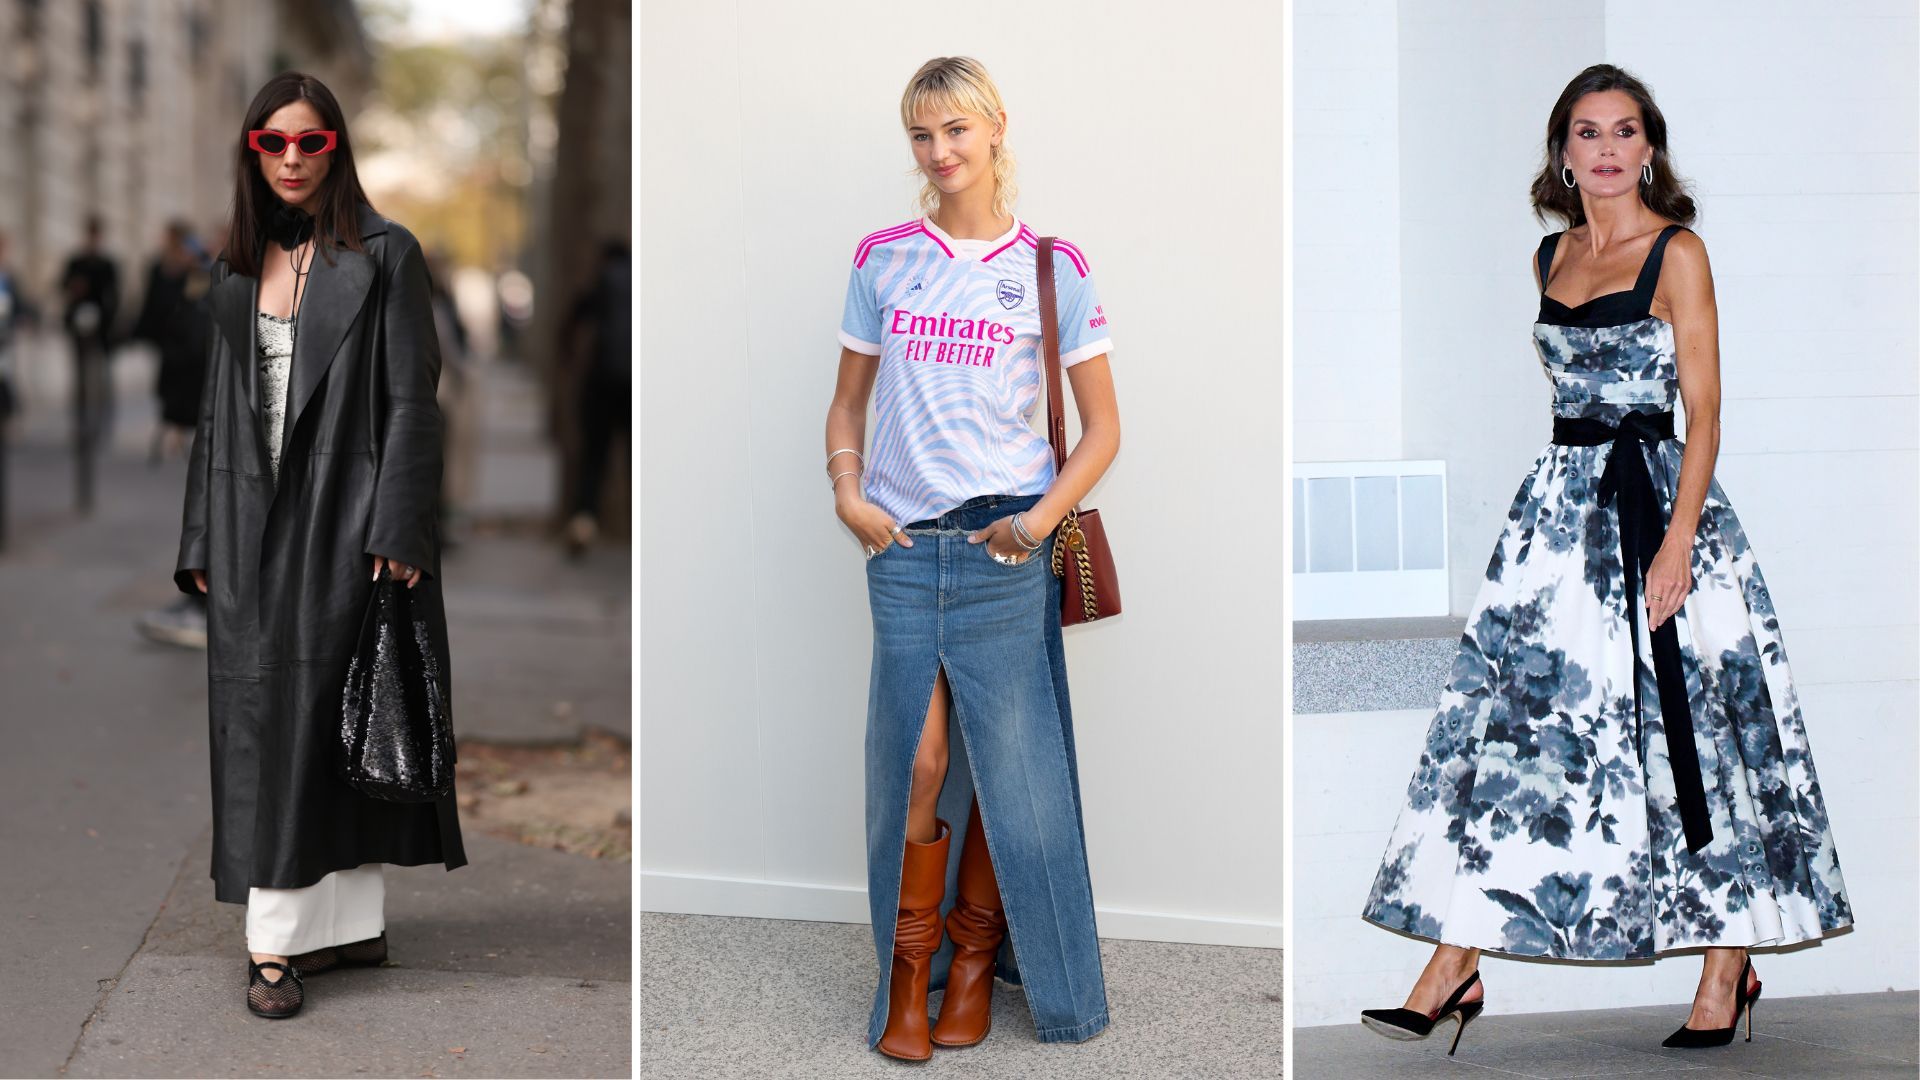 The Top Boho Fashion Trends to Watch Out for in 2023